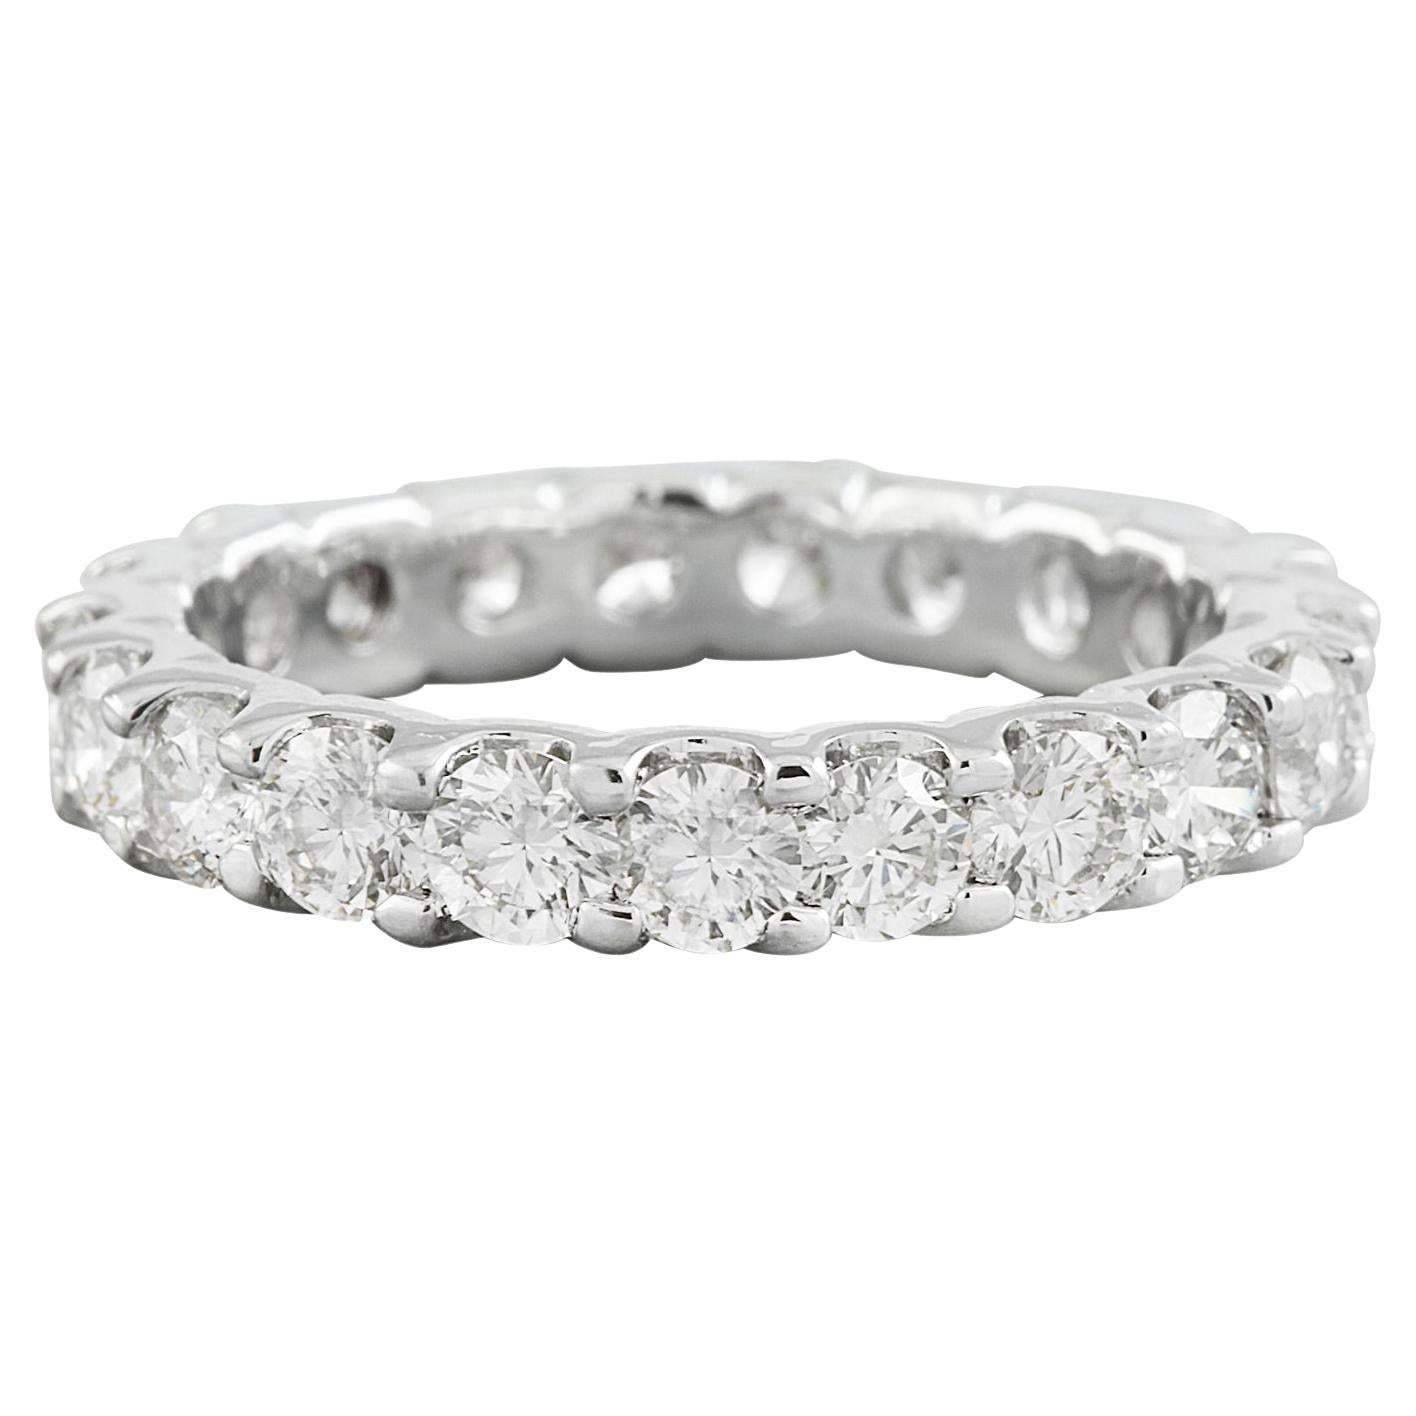 Exquisite 2.78 Carat Natural Diamond Eternity Ring: Timeless Luxury in 14K Solid